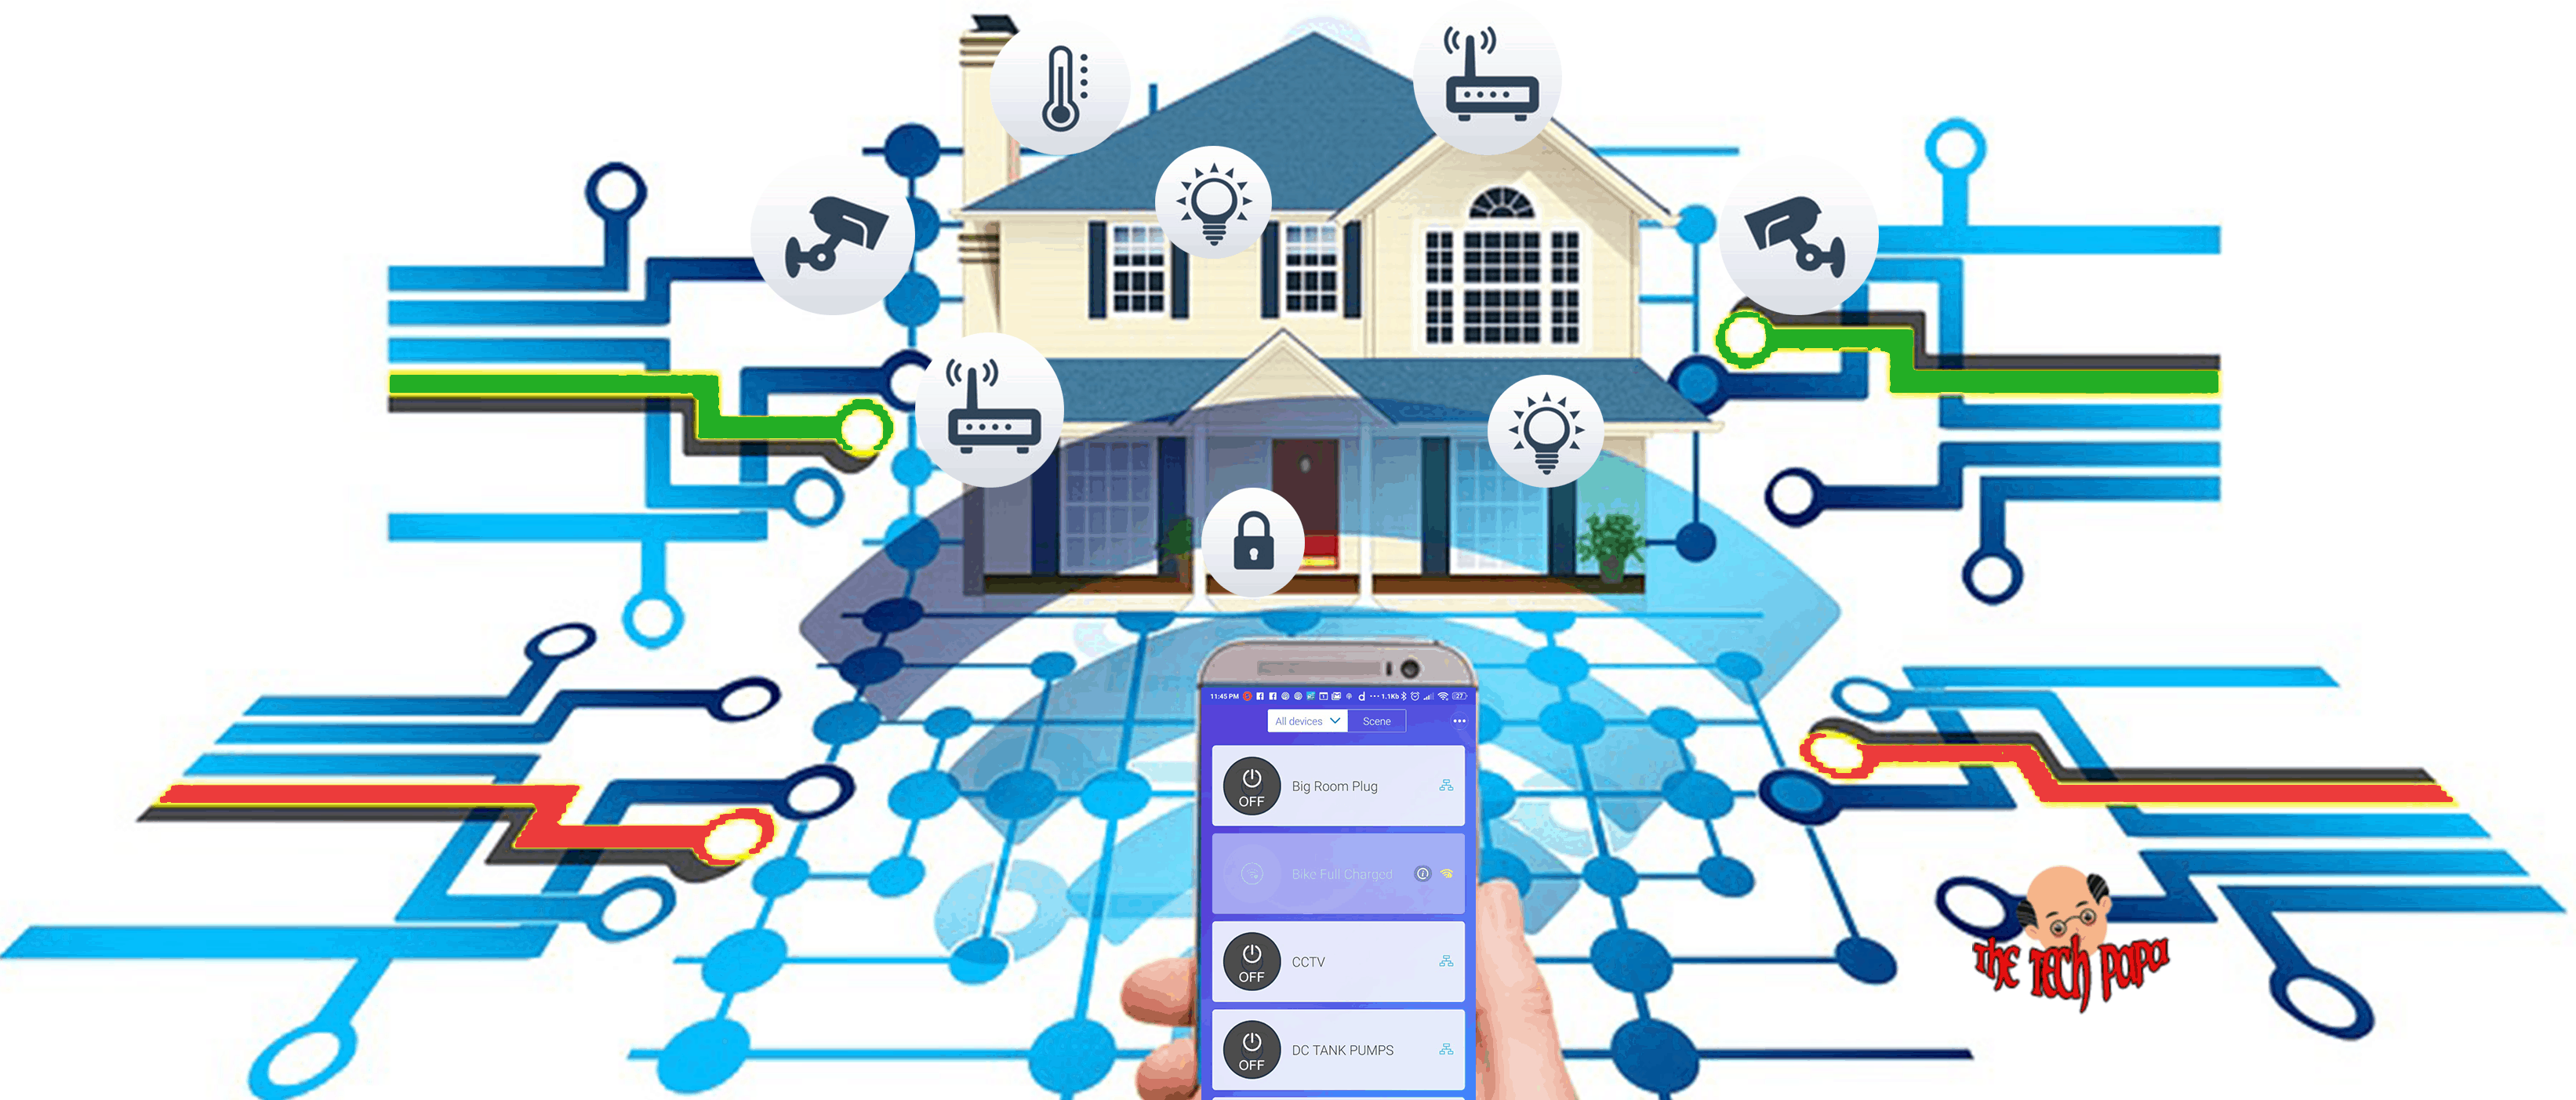 Create your own smart home – Make it your Hobby, use it as a stress release or earn some extra bucks